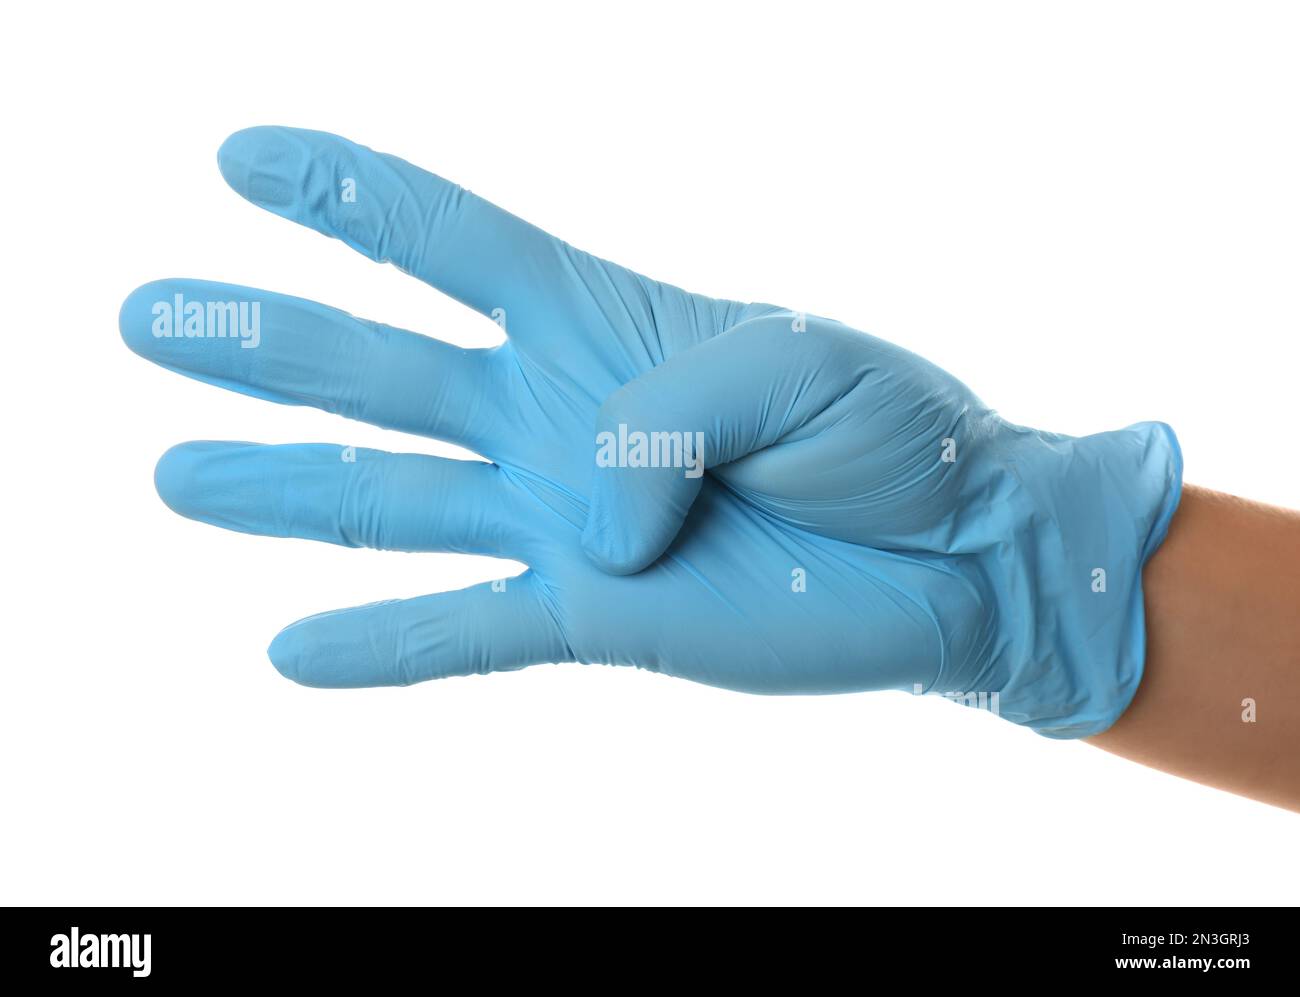 Thin Work Gloves Shows Four Fingers Stock Photo - Download Image Now -  2015, Clothing, Cut Out - iStock